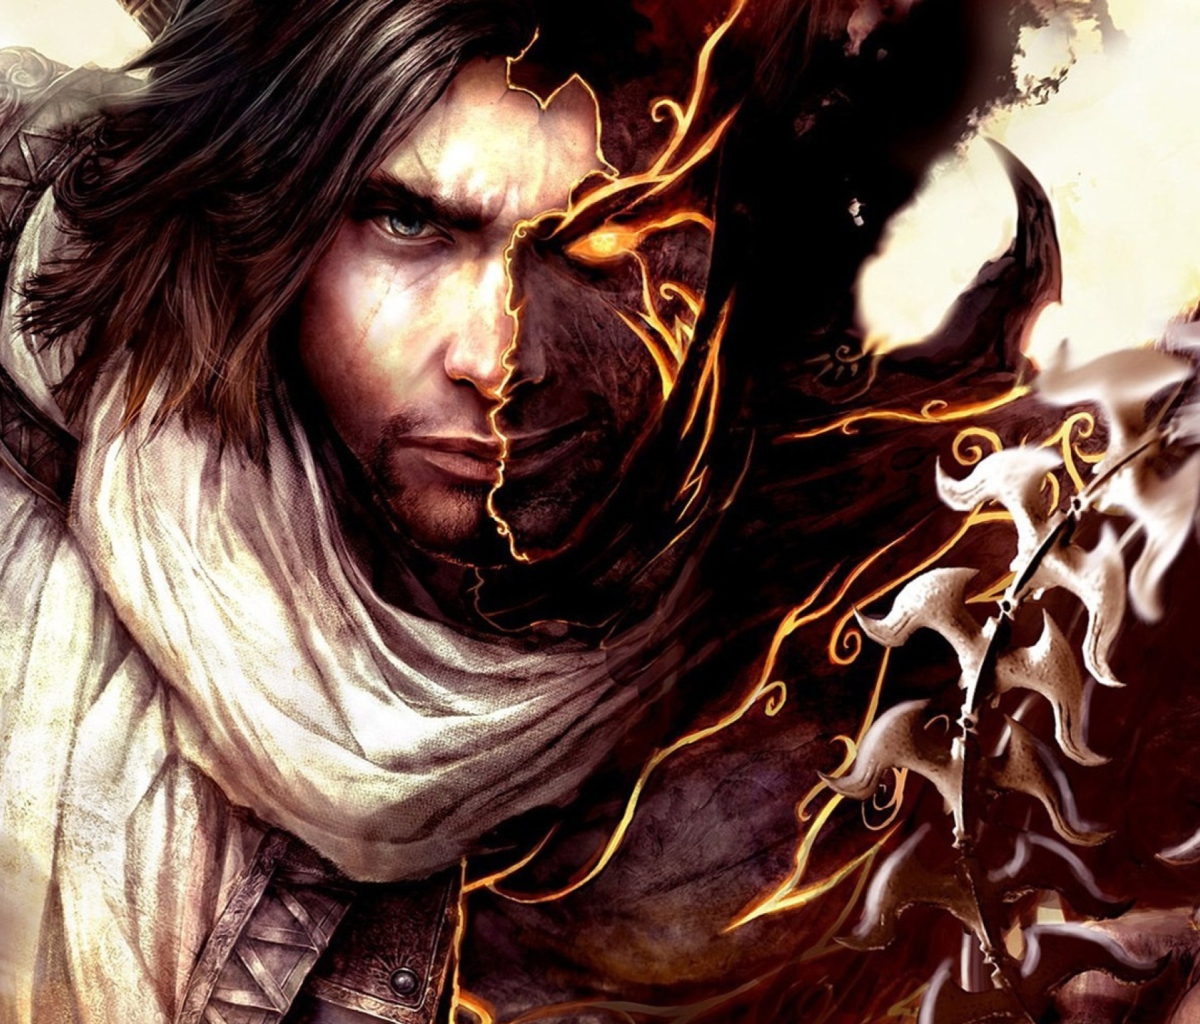 Prince Of Persia - The Two Thrones screenshot #1 1200x1024